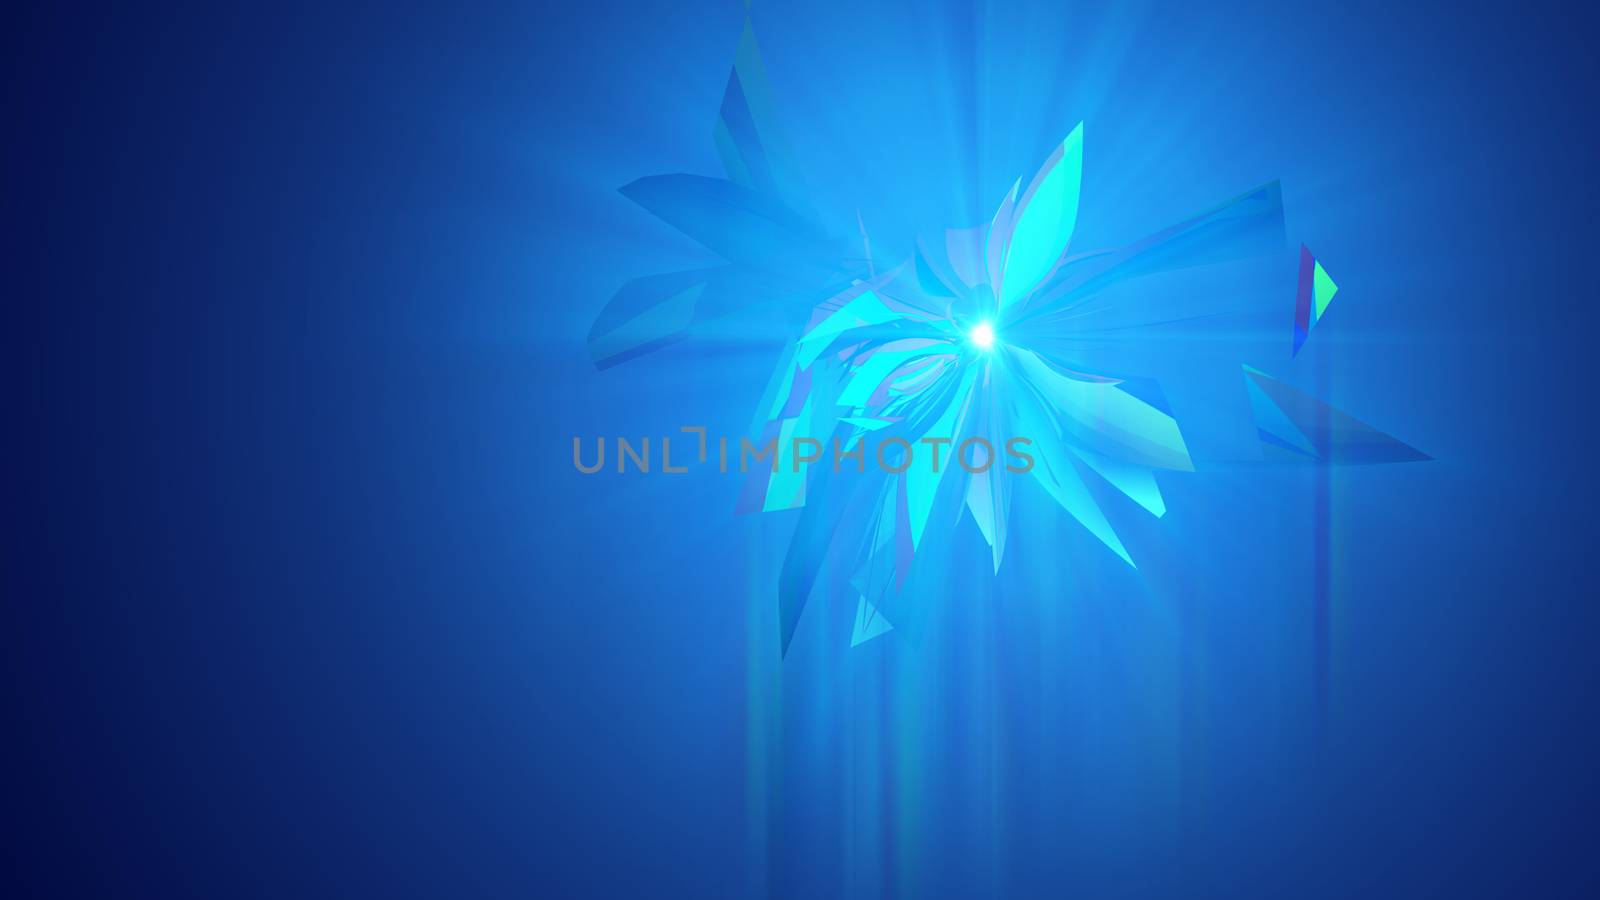 A luxury 3d illustration of shining see-through triangles spinning around like alive crystals in the light blue background. They generate the mood of high art and optimism.